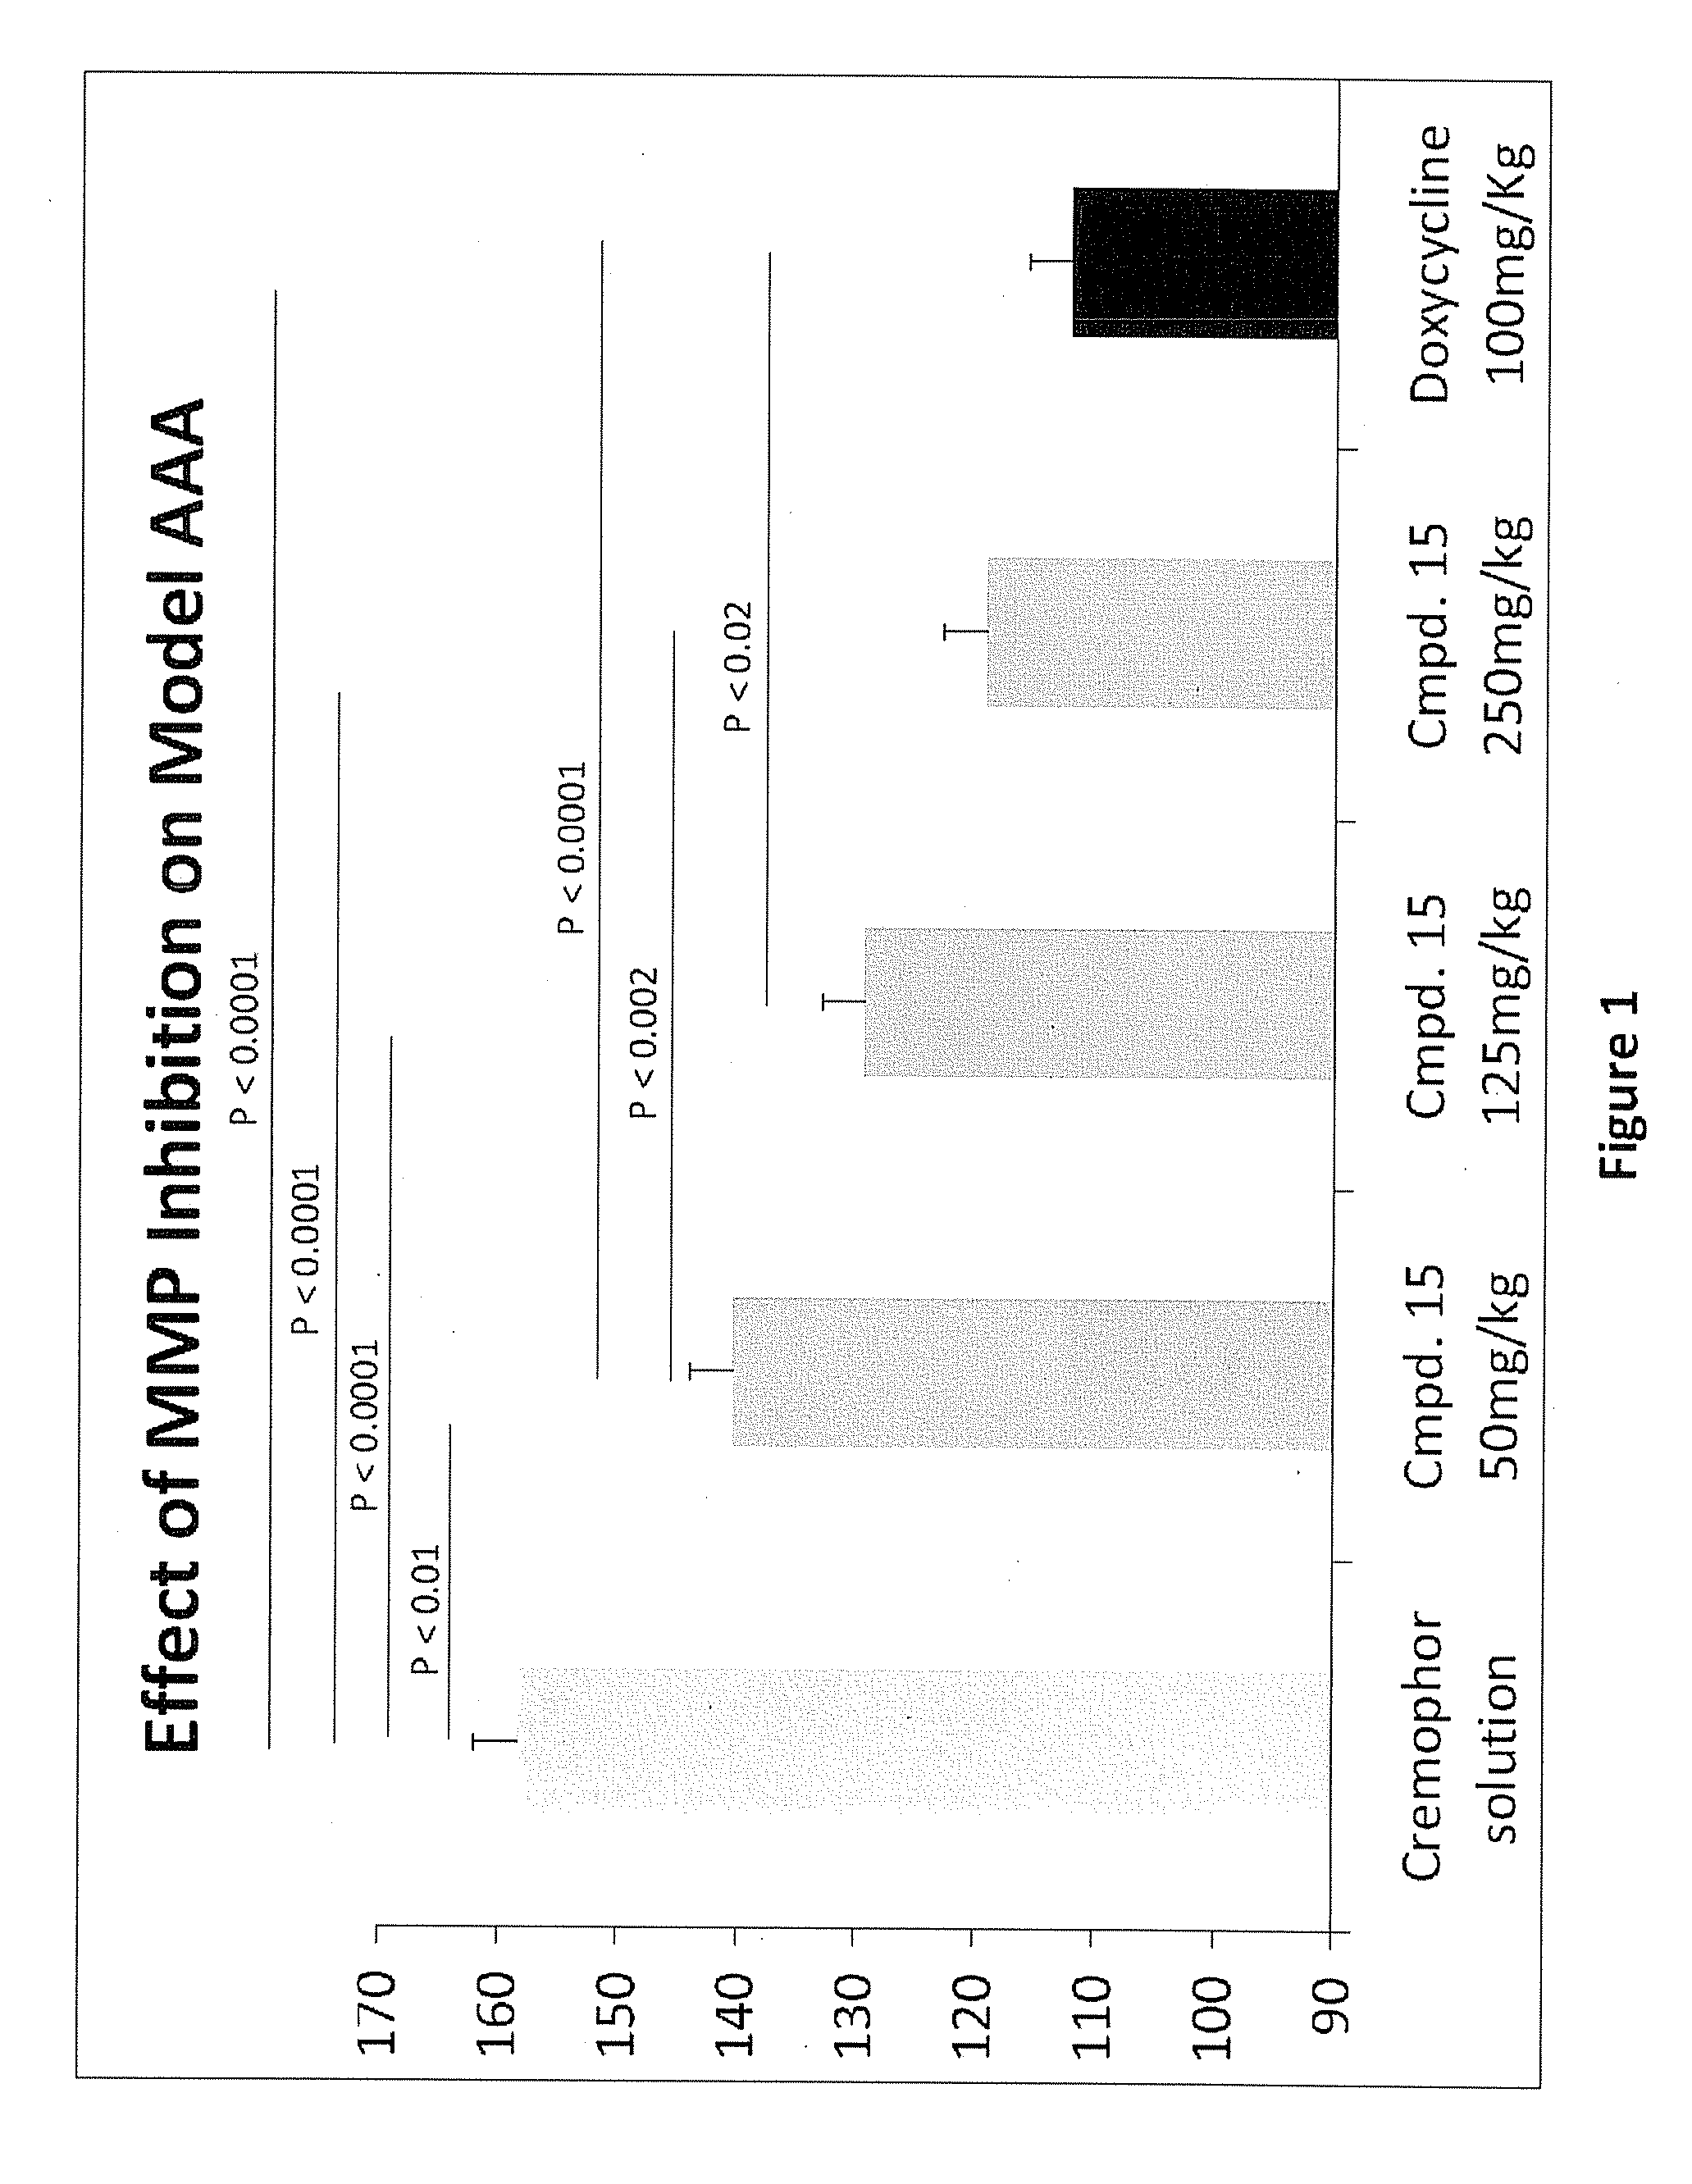 Methods of Treating Aneurysmal Dilatation, Blood Vessel Wall Weakness and Specifically Abdominal Aortic and Thoracic Aneurysm Using Matrix Metalloprotease-2 Inhibitors